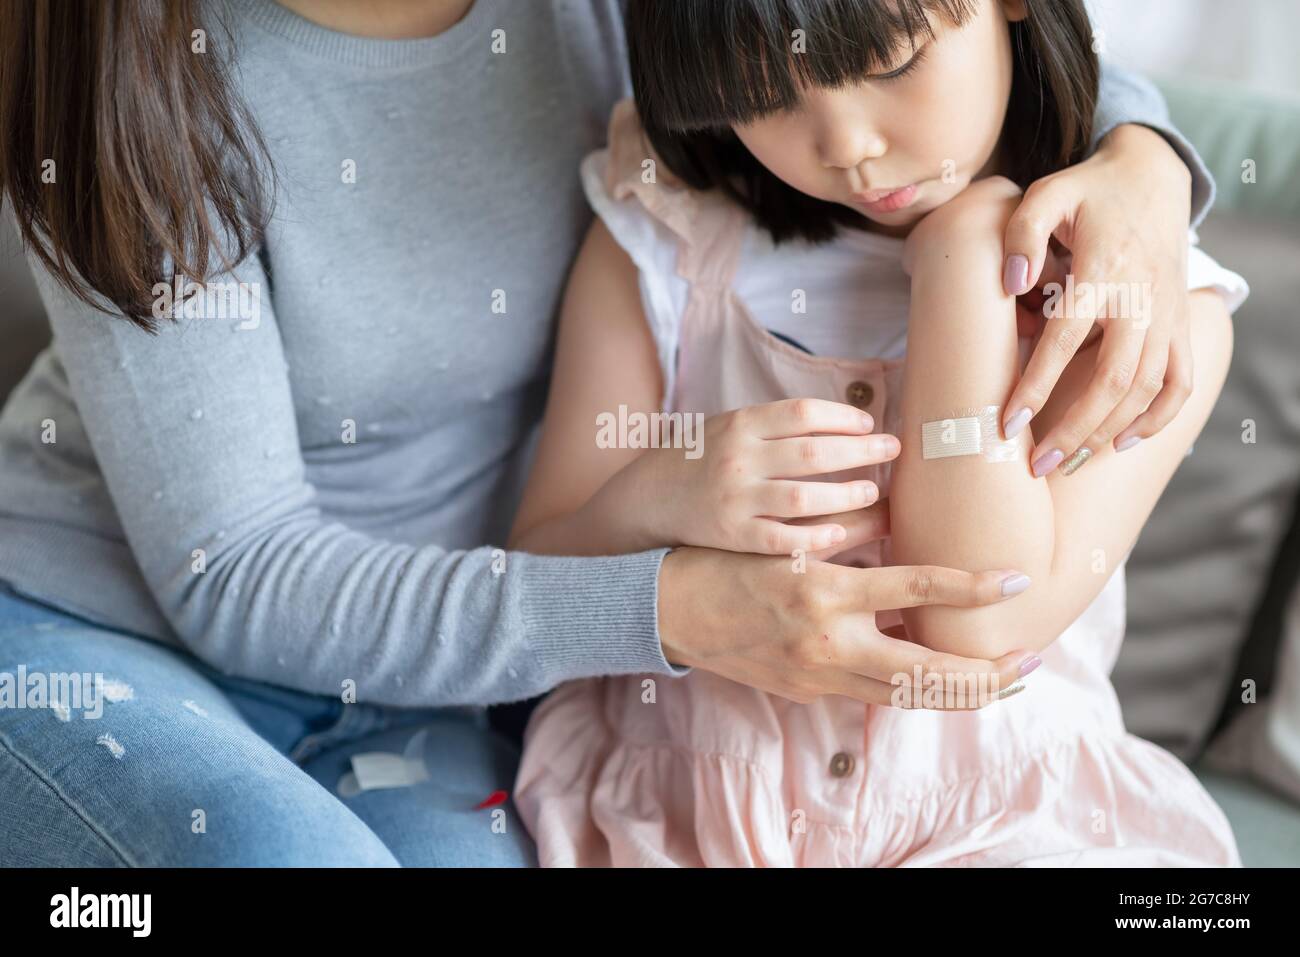 Asian mother putting court plaster adhesive bandage onto her daughter at home Stock Photo